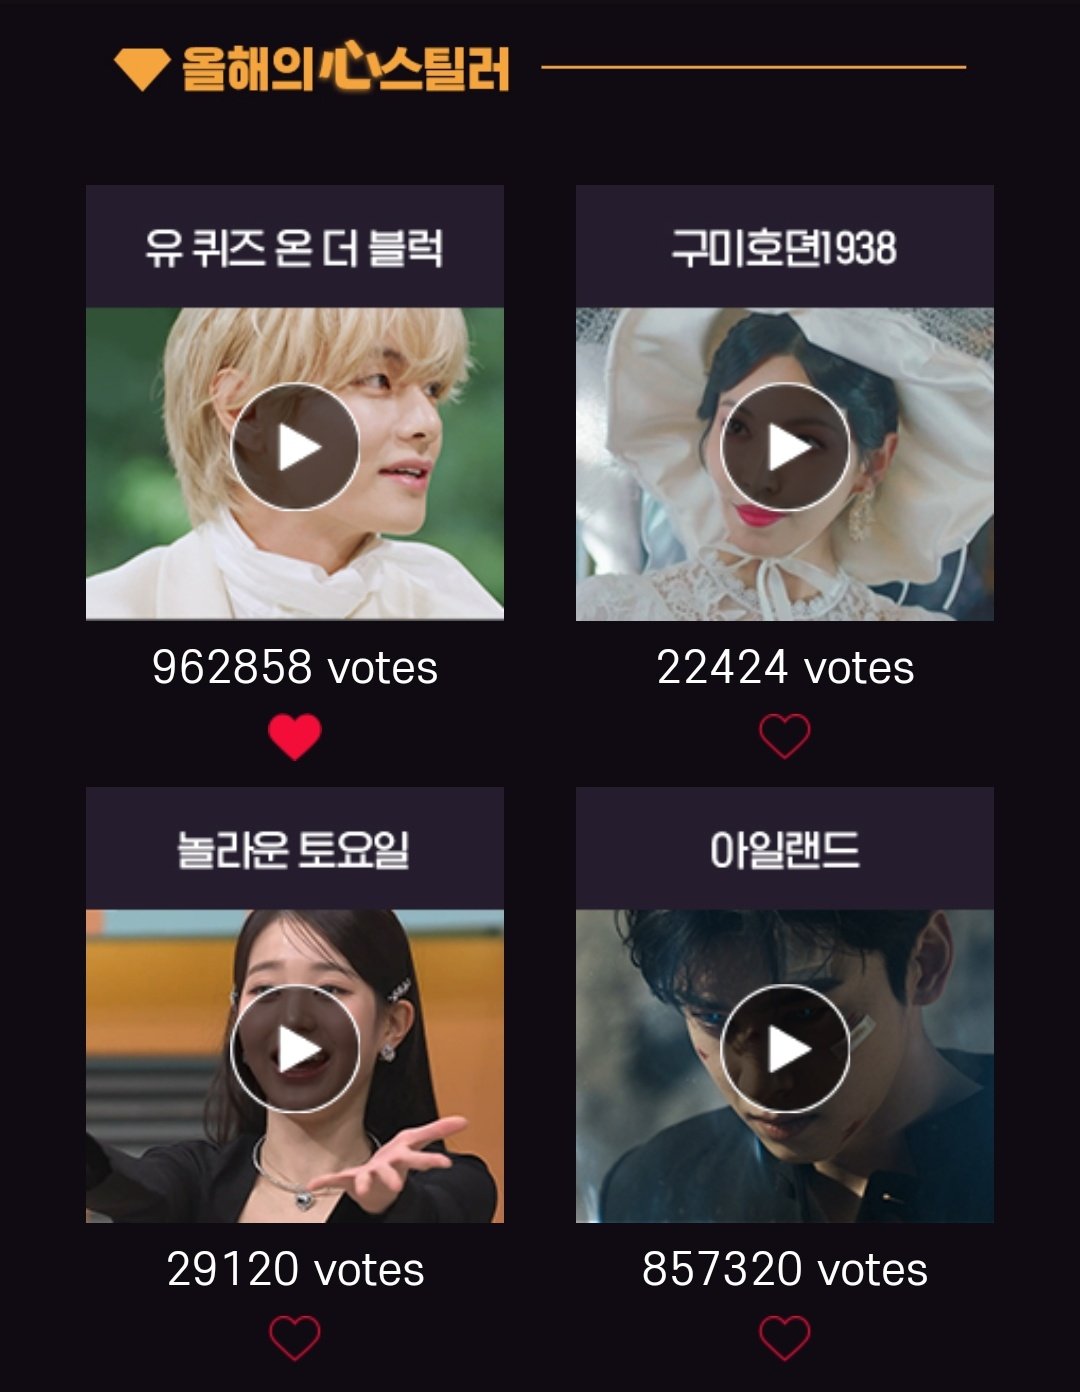 Joon Voting Squad #IndigoByRM on X: SEC AWARDS: Artista Asiático Musical  Vote for RM, tutorial below! Unlimited votes per day in website:  🔗 Vote on Twitter: I vote #RM for #ArtistaAsiatico  at #